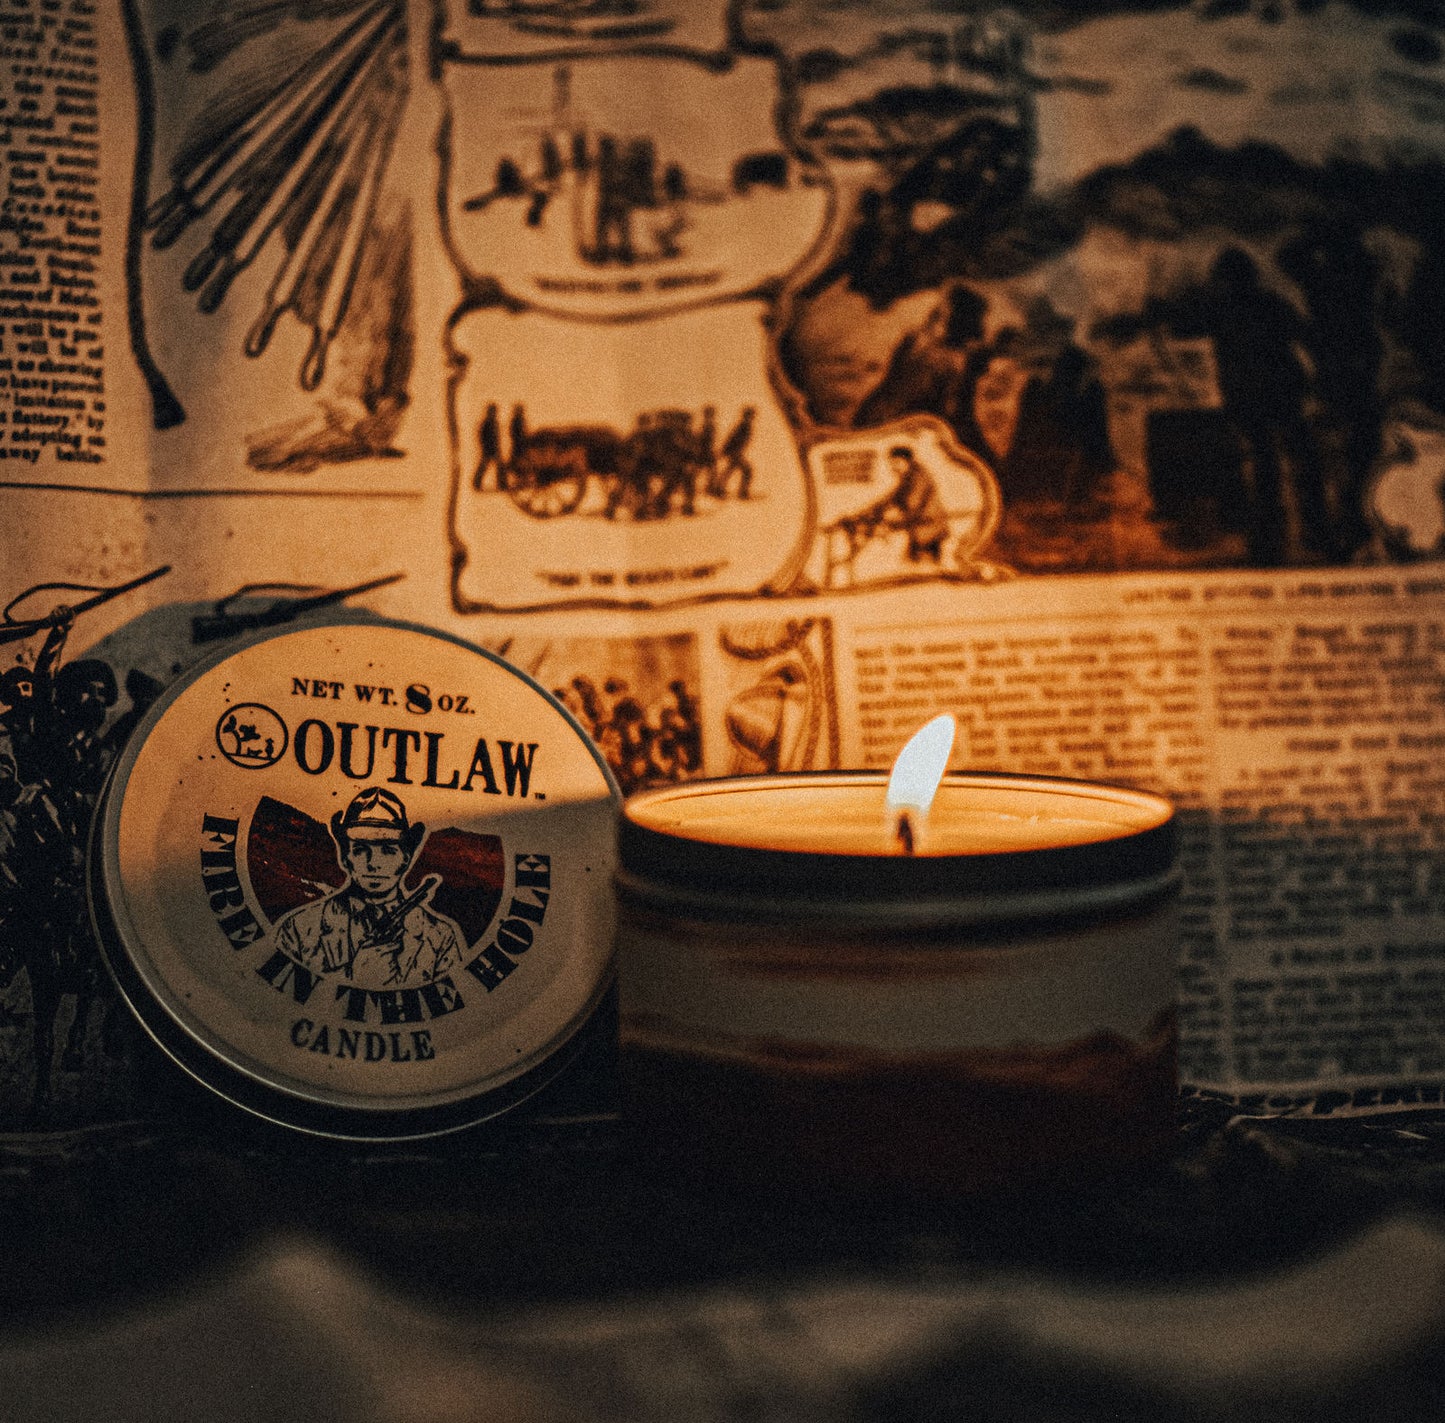 Outlaw's Fire in the Hole Candle  Inspired by camping with friends